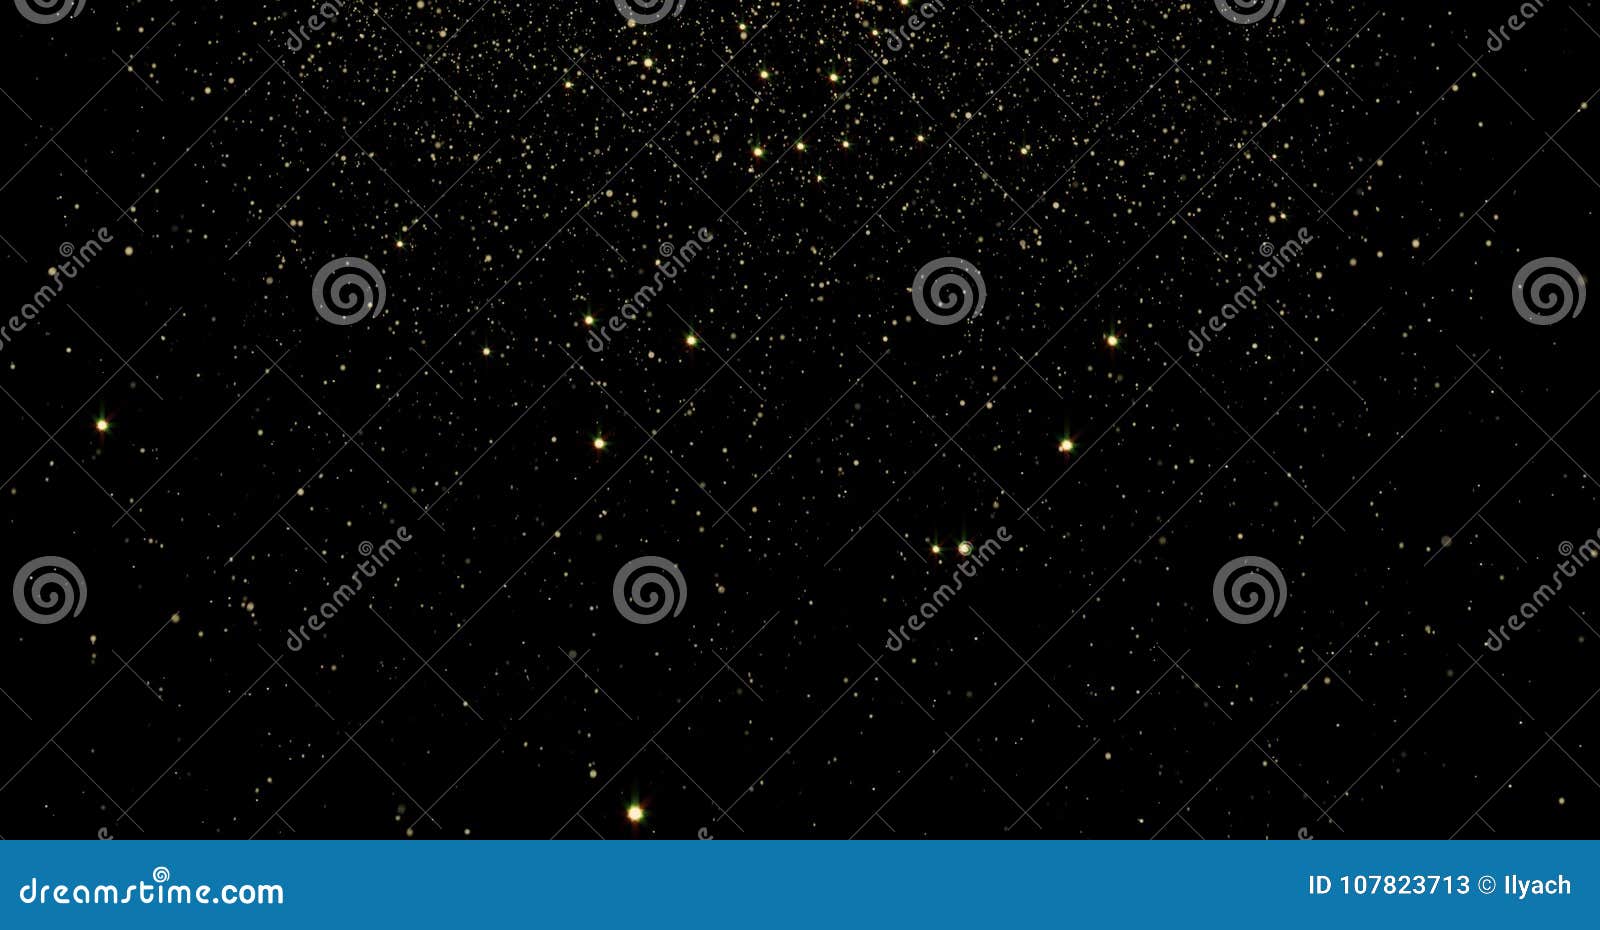 abstract gold particles and sparkling stars or shimmering light effect background. light flare shine or glare overlay effect for l